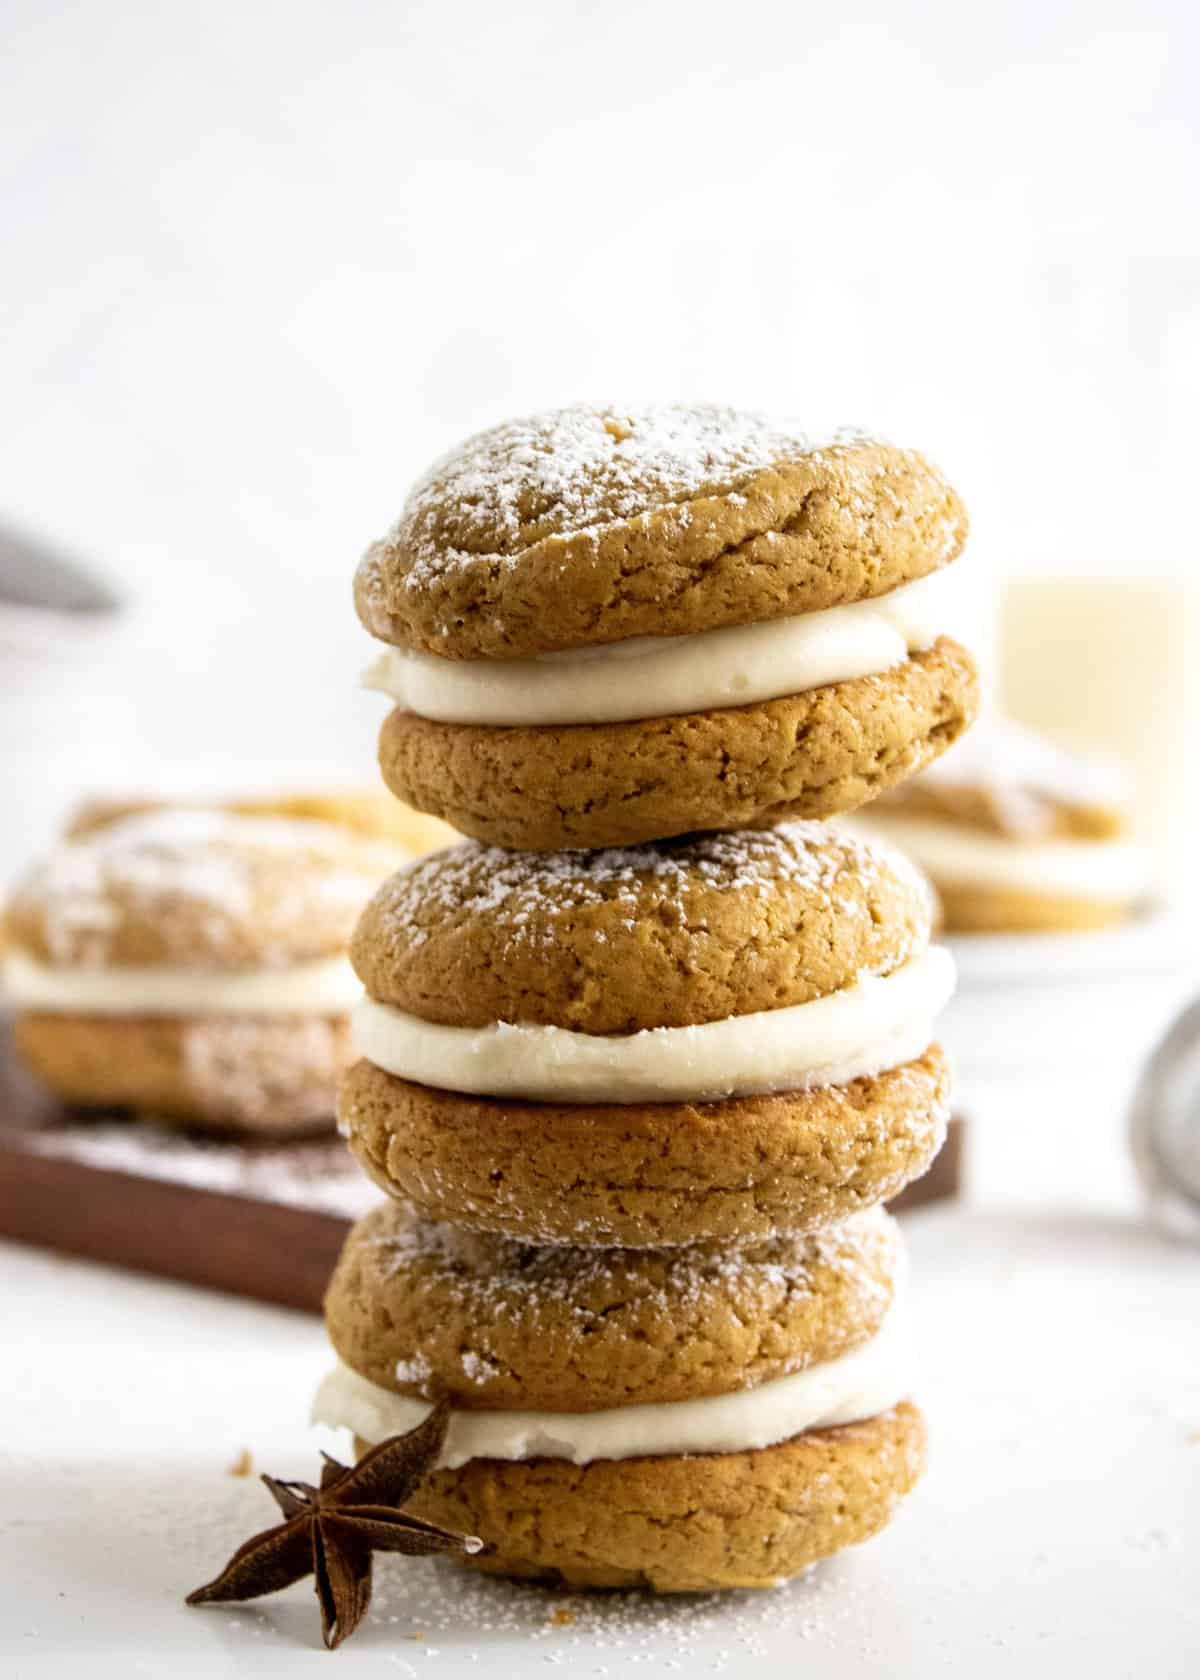 Three whoopie pies stacked together with white background.